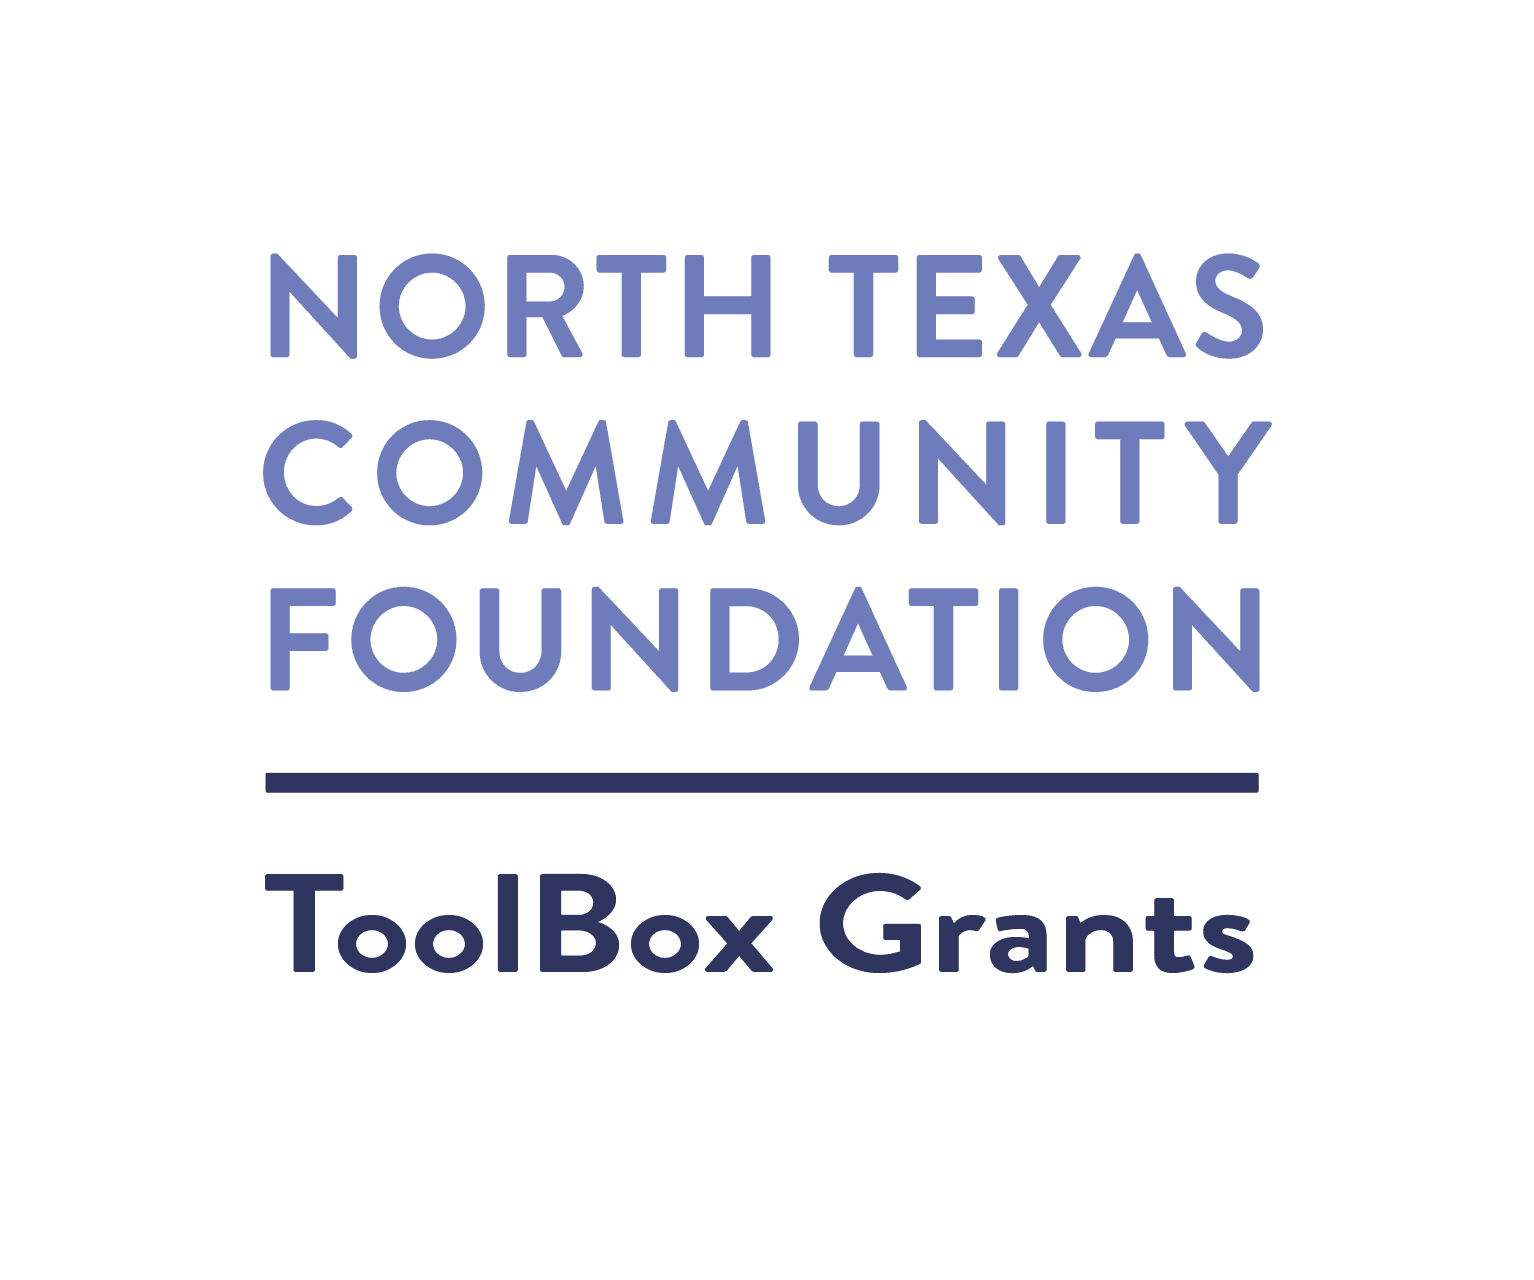 Sixty & Better receives ToolBox Grants at North Texas Community Foundation